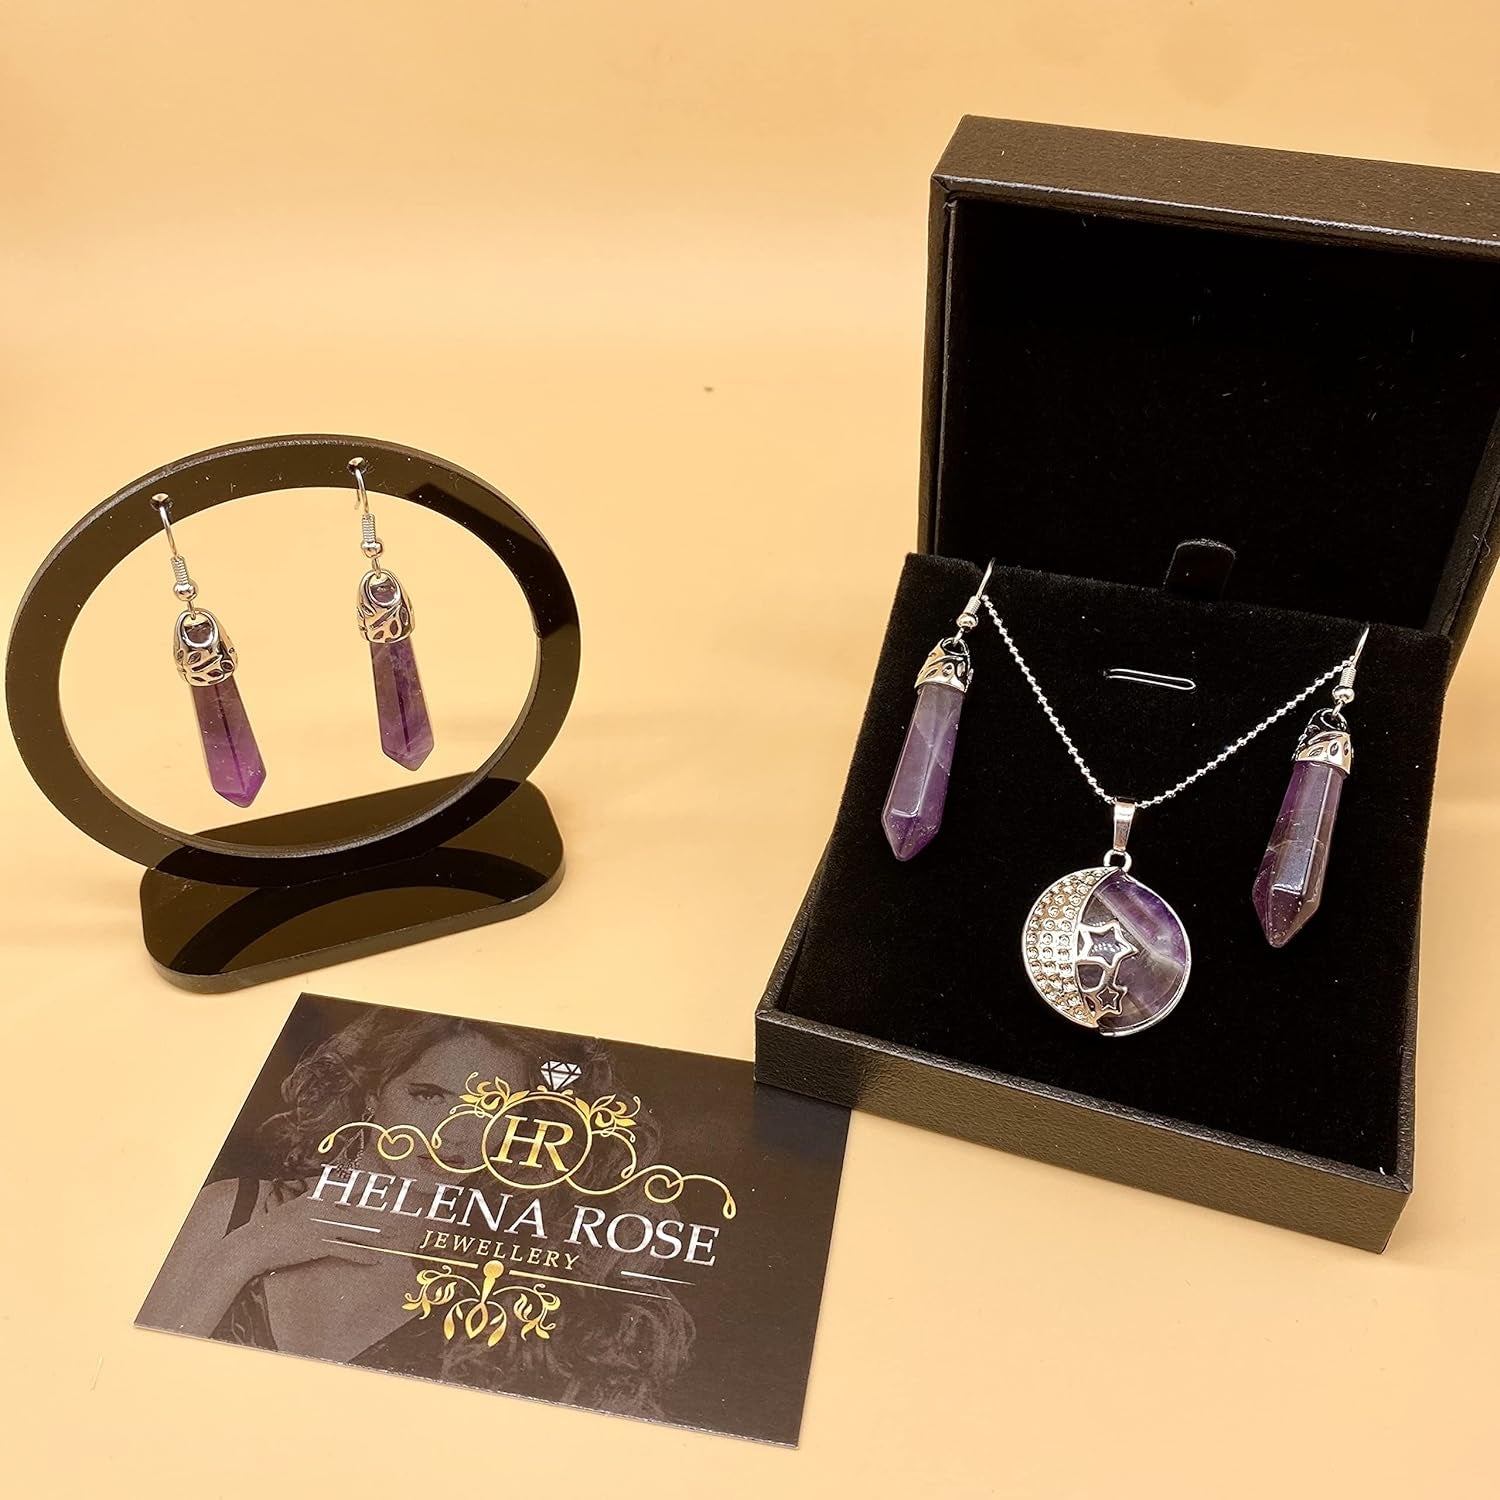 Jewellery Gift Set for Women - Silver Moon & Stars Necklace & Drop Earrings - Real Natural Crystal Quartz Gemstone Pendant for Ladies - with a Quality Gift Box